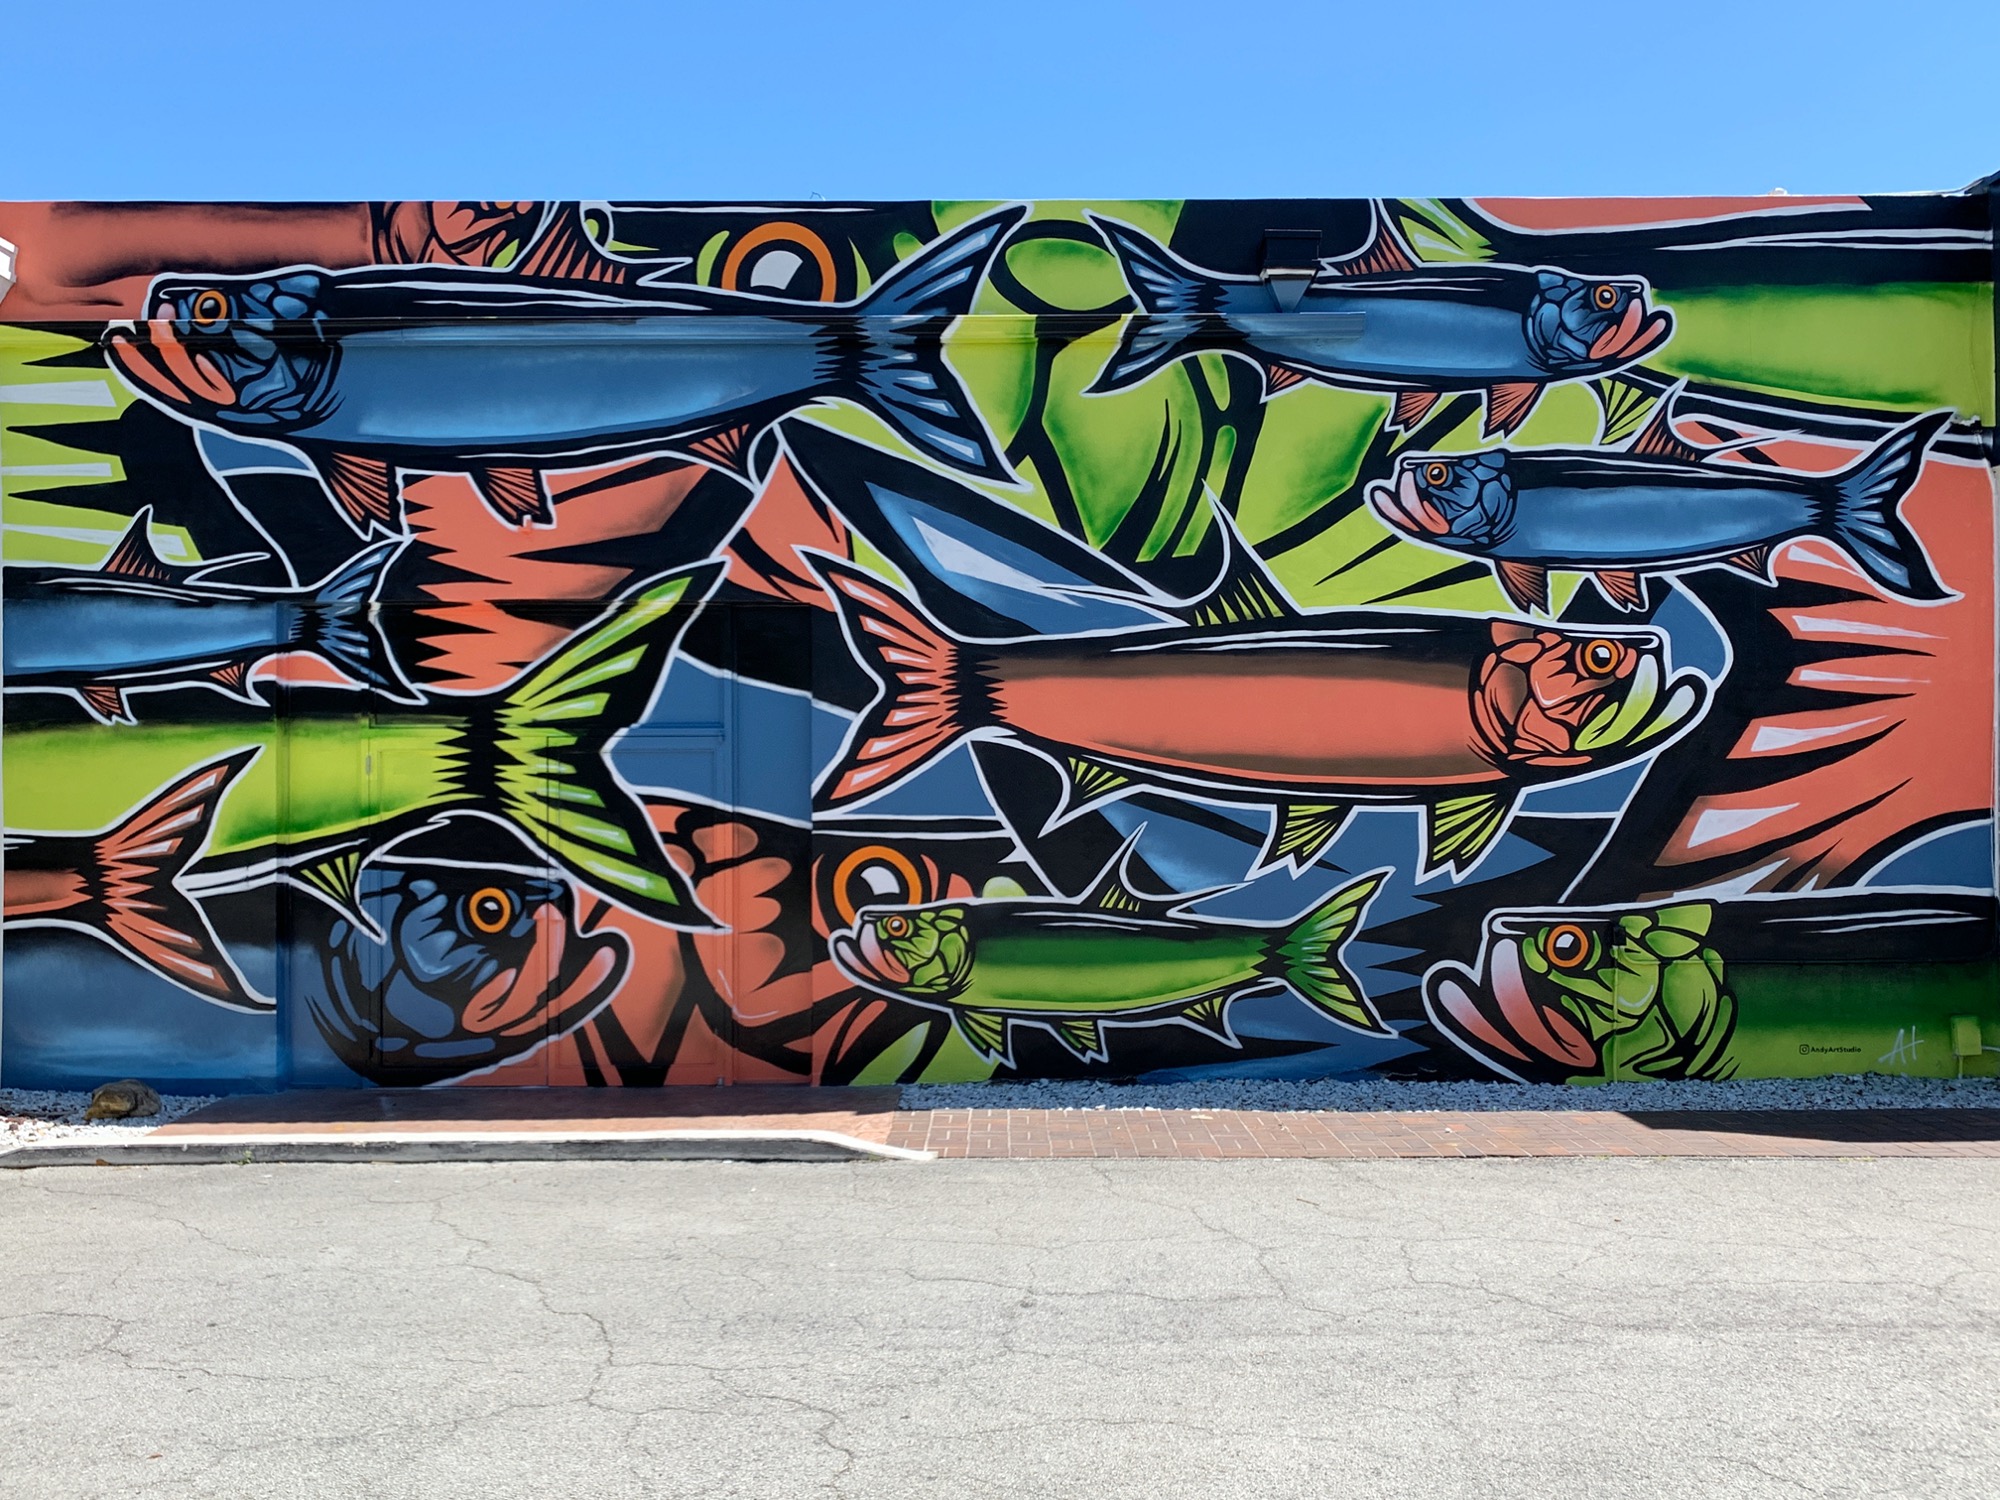 Graffiti 4112  captured by JamesZ in Fort Lauderdale United States